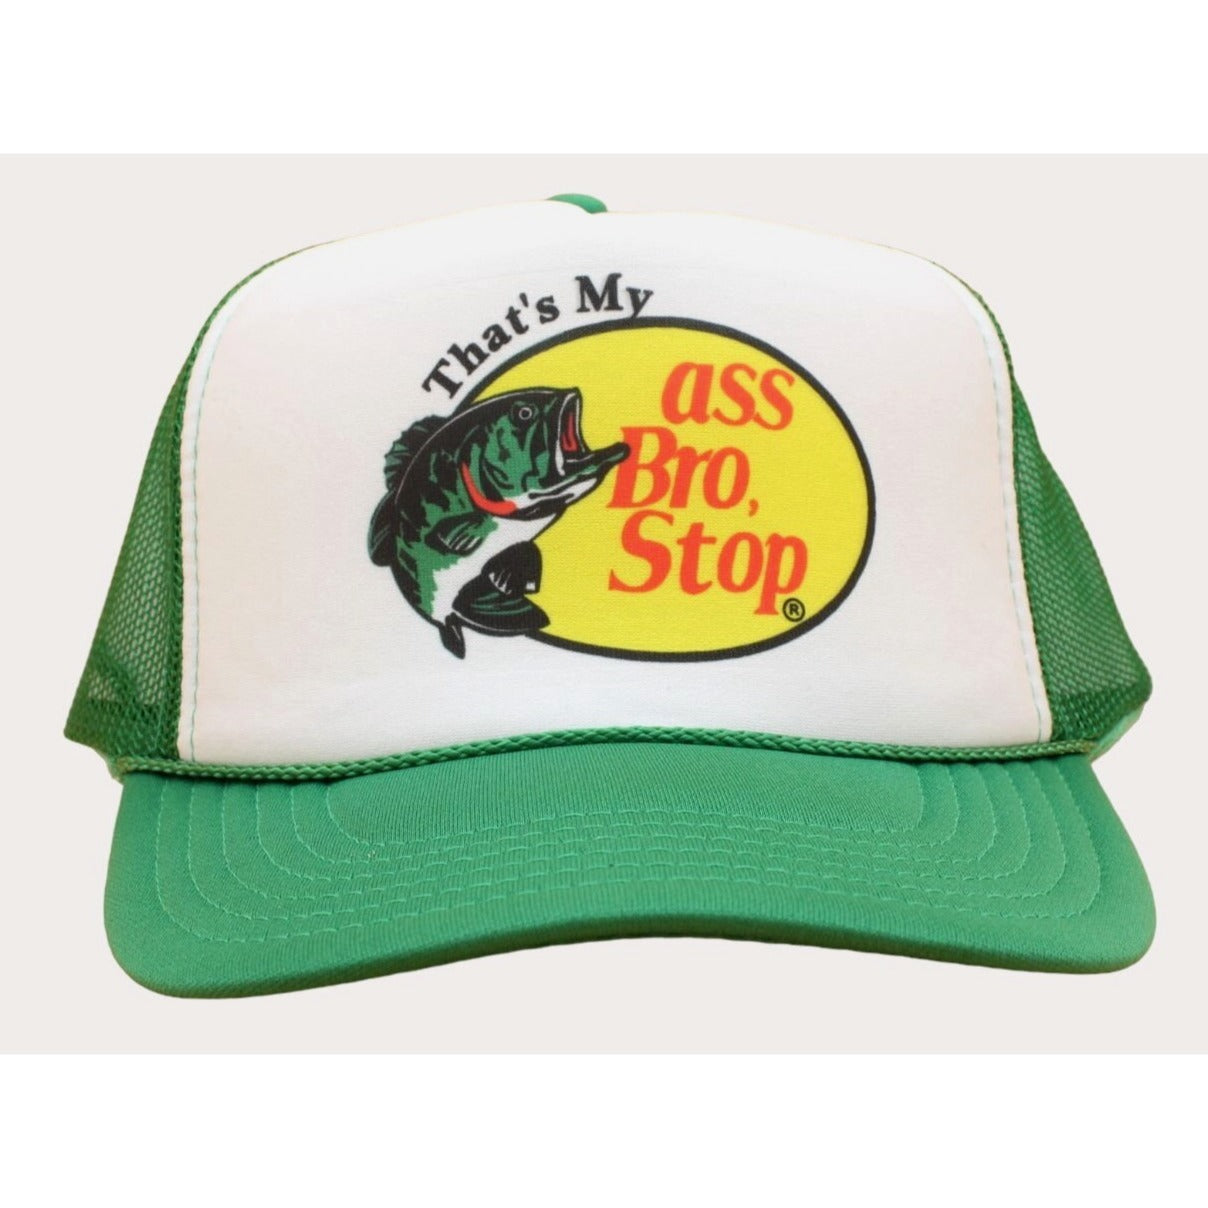 That's My Ass Bro Stop Hat